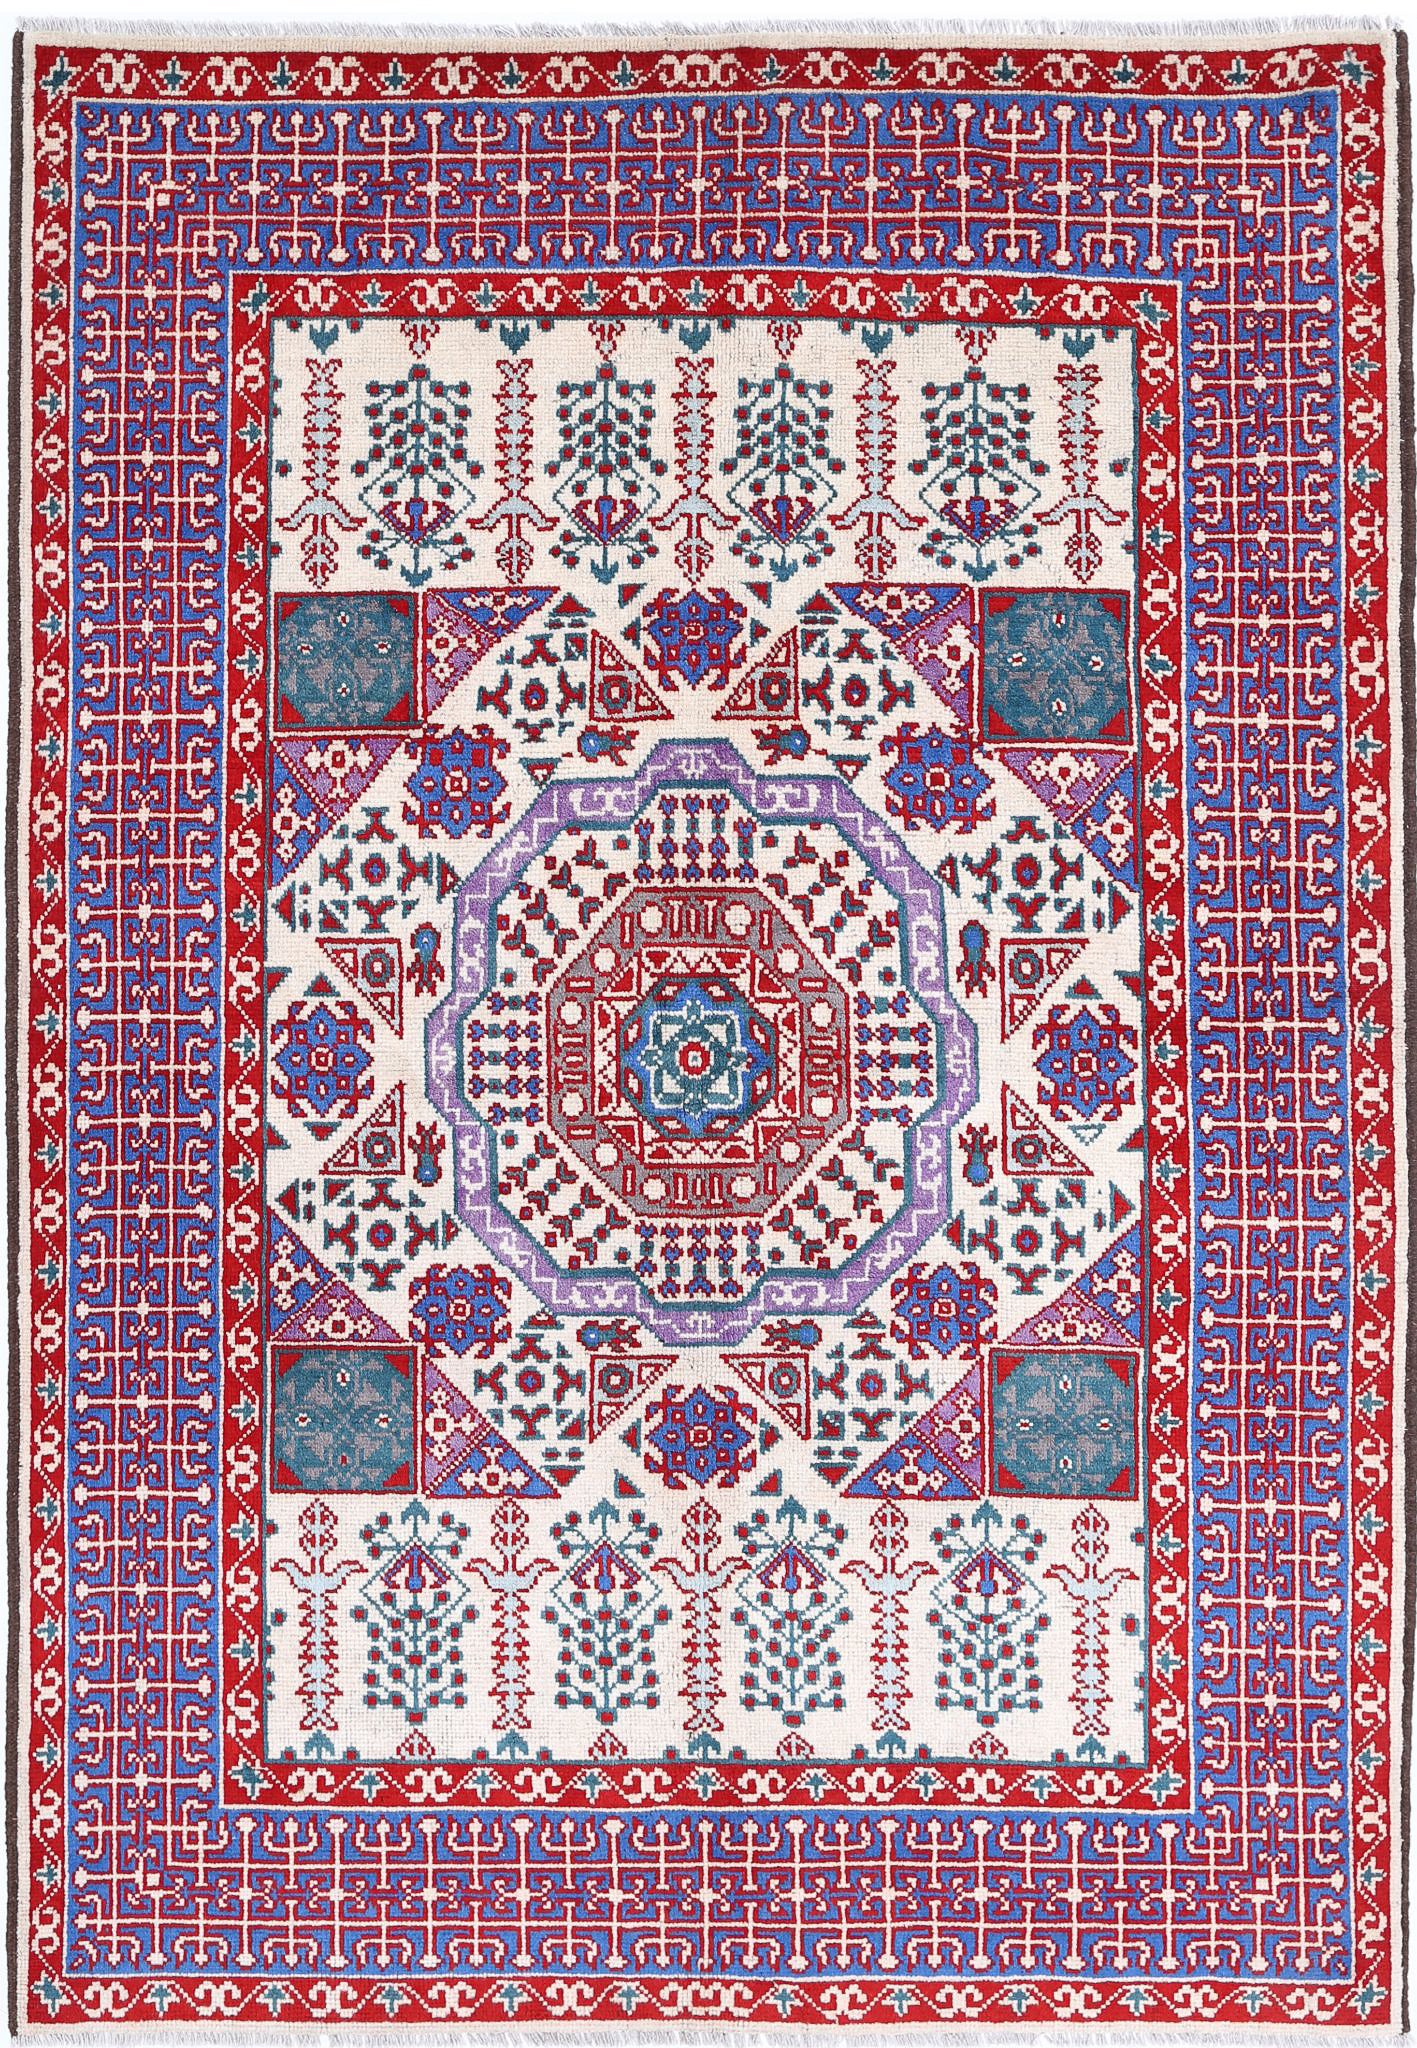 Revival-hand-knotted-qarghani-wool-rug-5014226.jpg